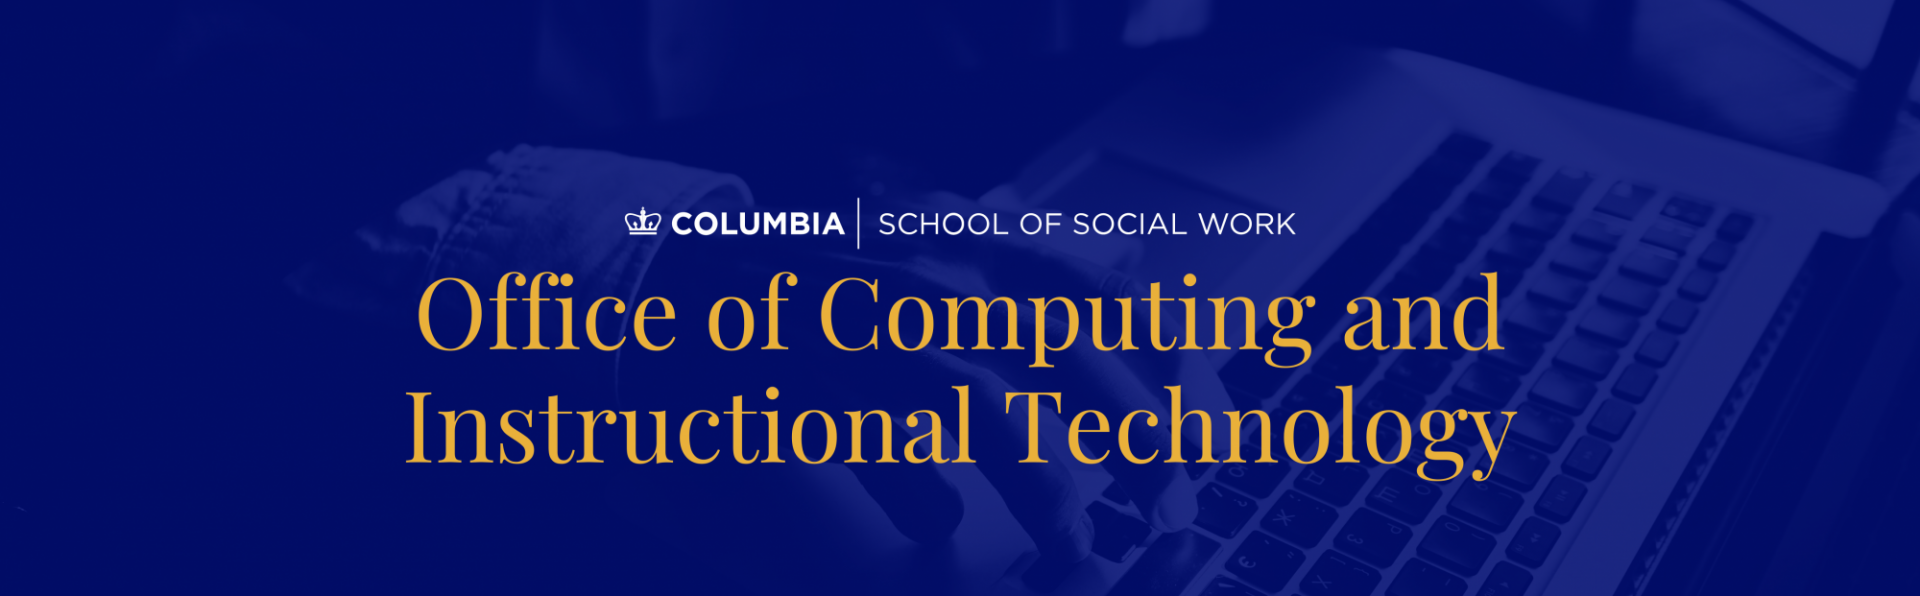 Someone typing at a laptop. Text says "Office of Computing and Instructional Technology"